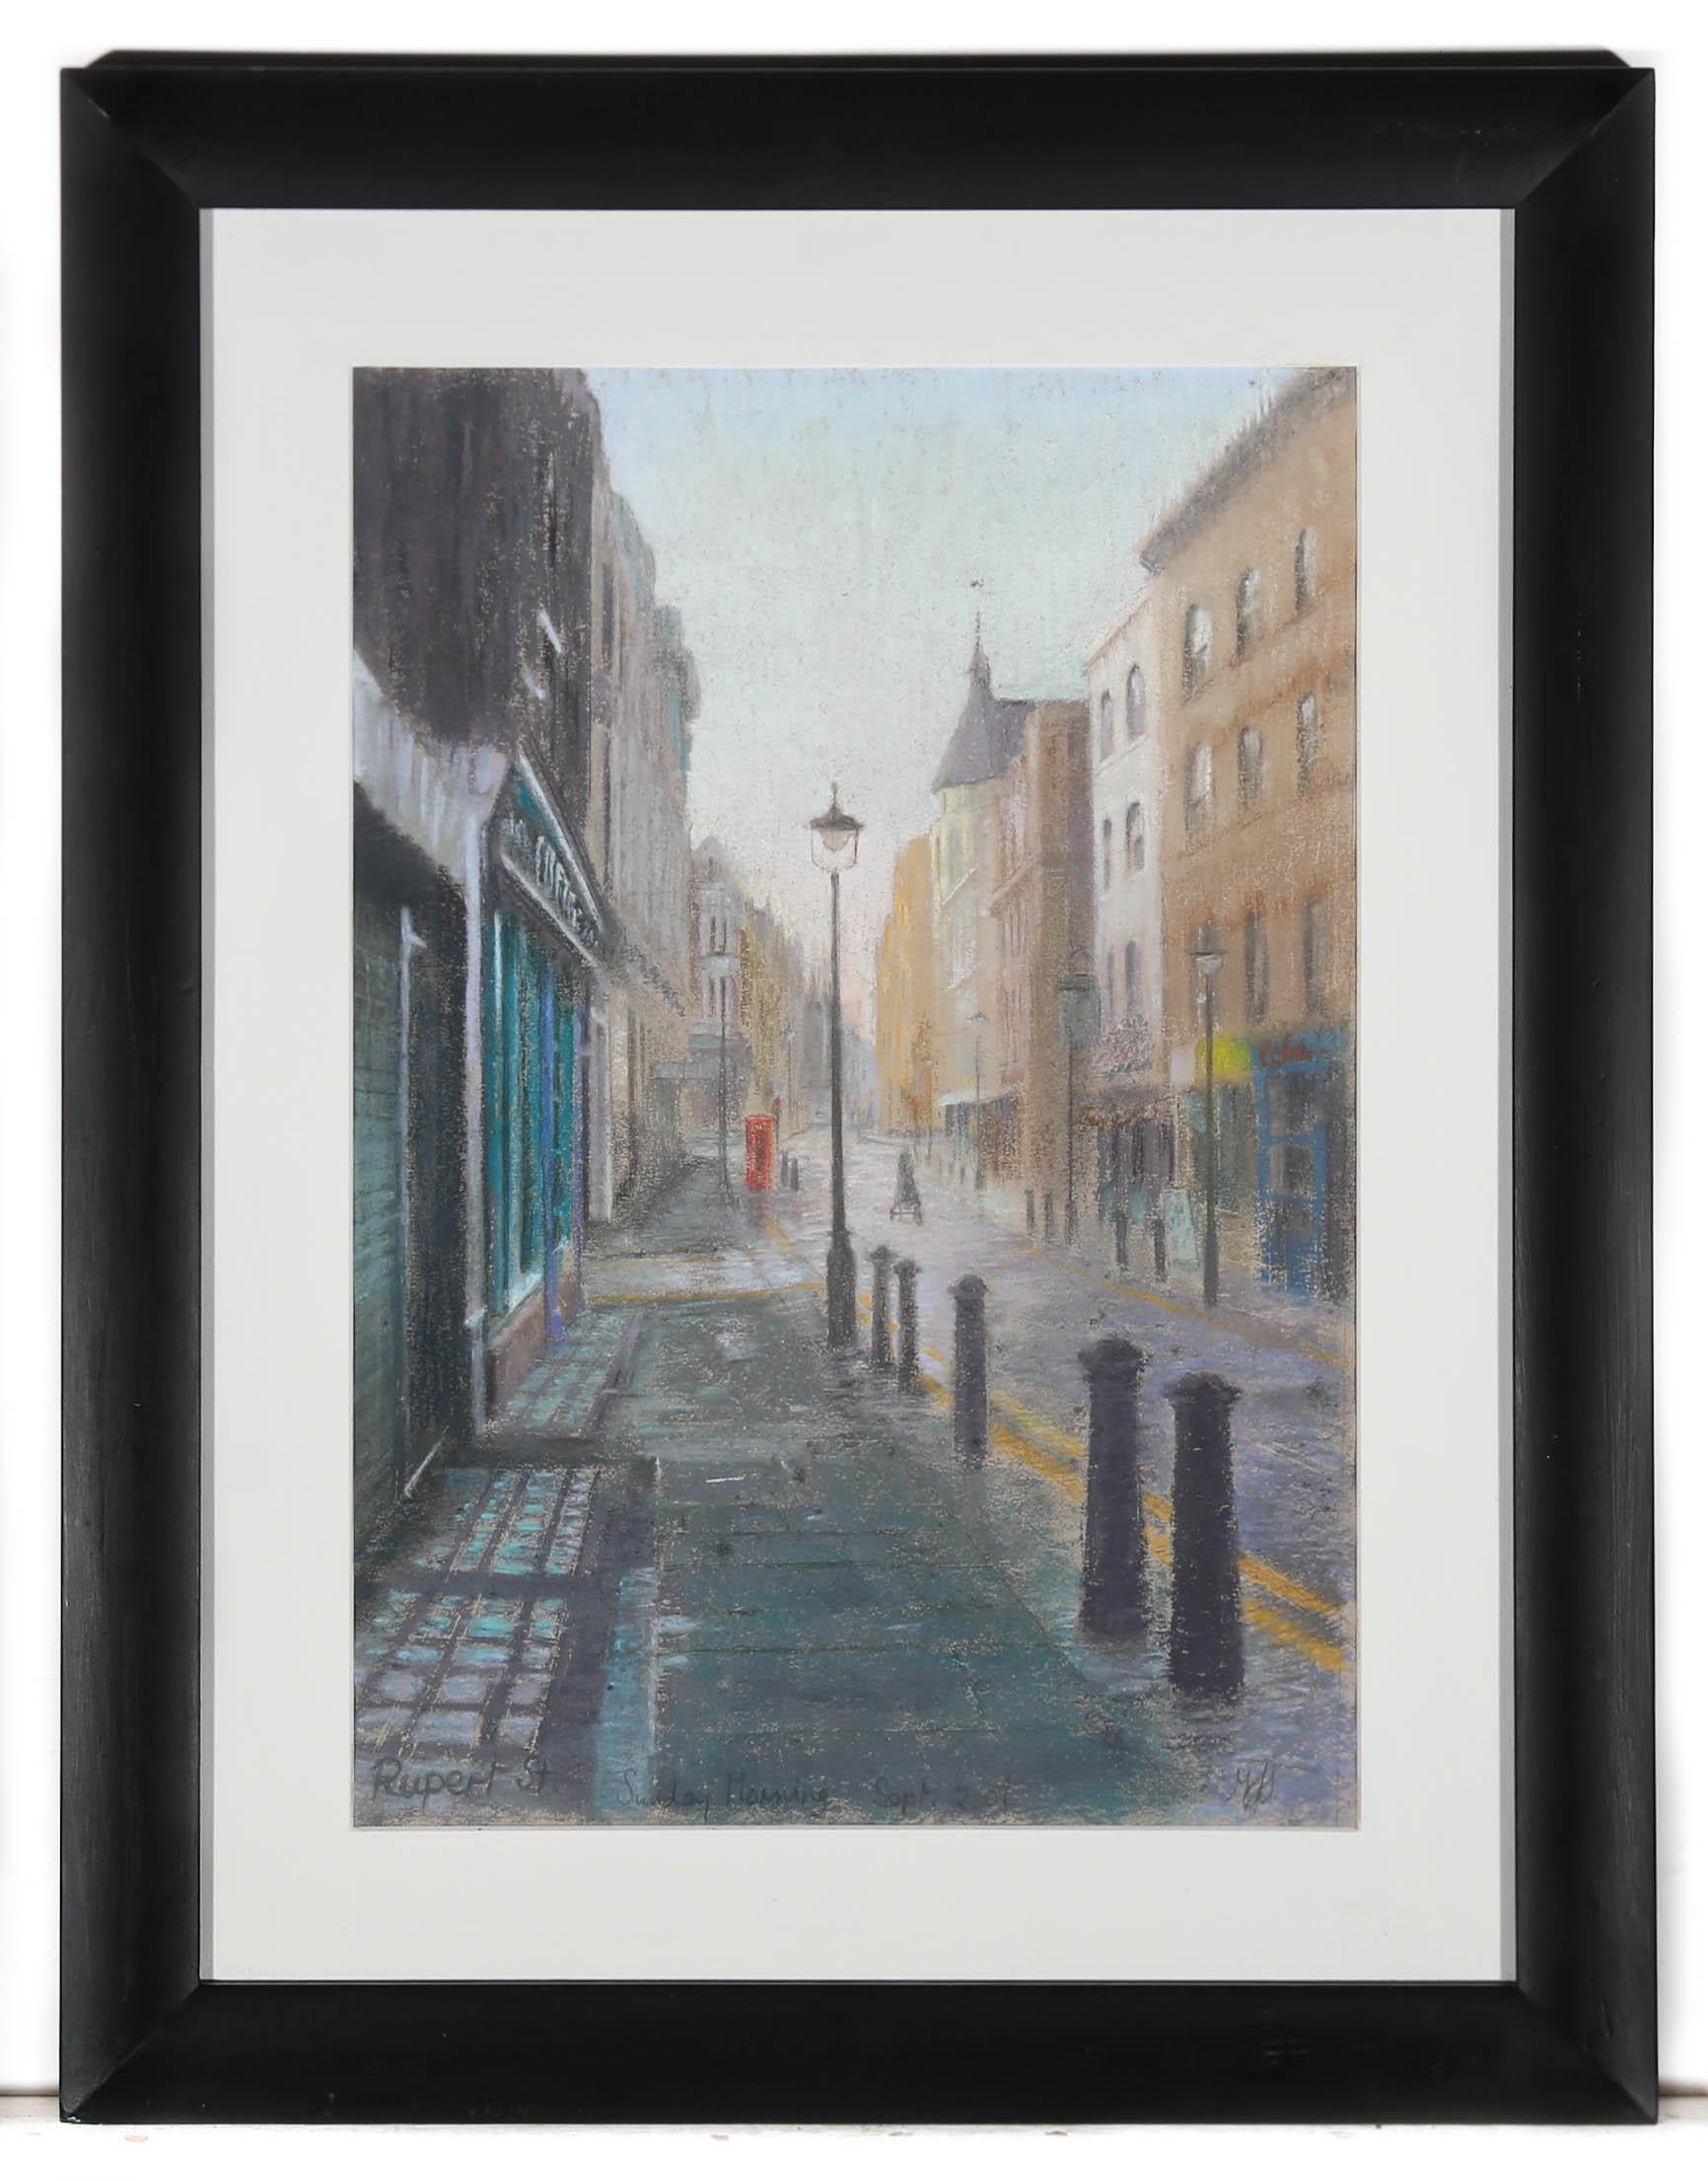 A precisely drawn pastel study of Rupert St on a quiet Sunday morning. Pops of colour take you on a journey passed closed shops, drawing your gaze further towards the centre vanish point in the scene. The artist has indistinctly monogramed to the